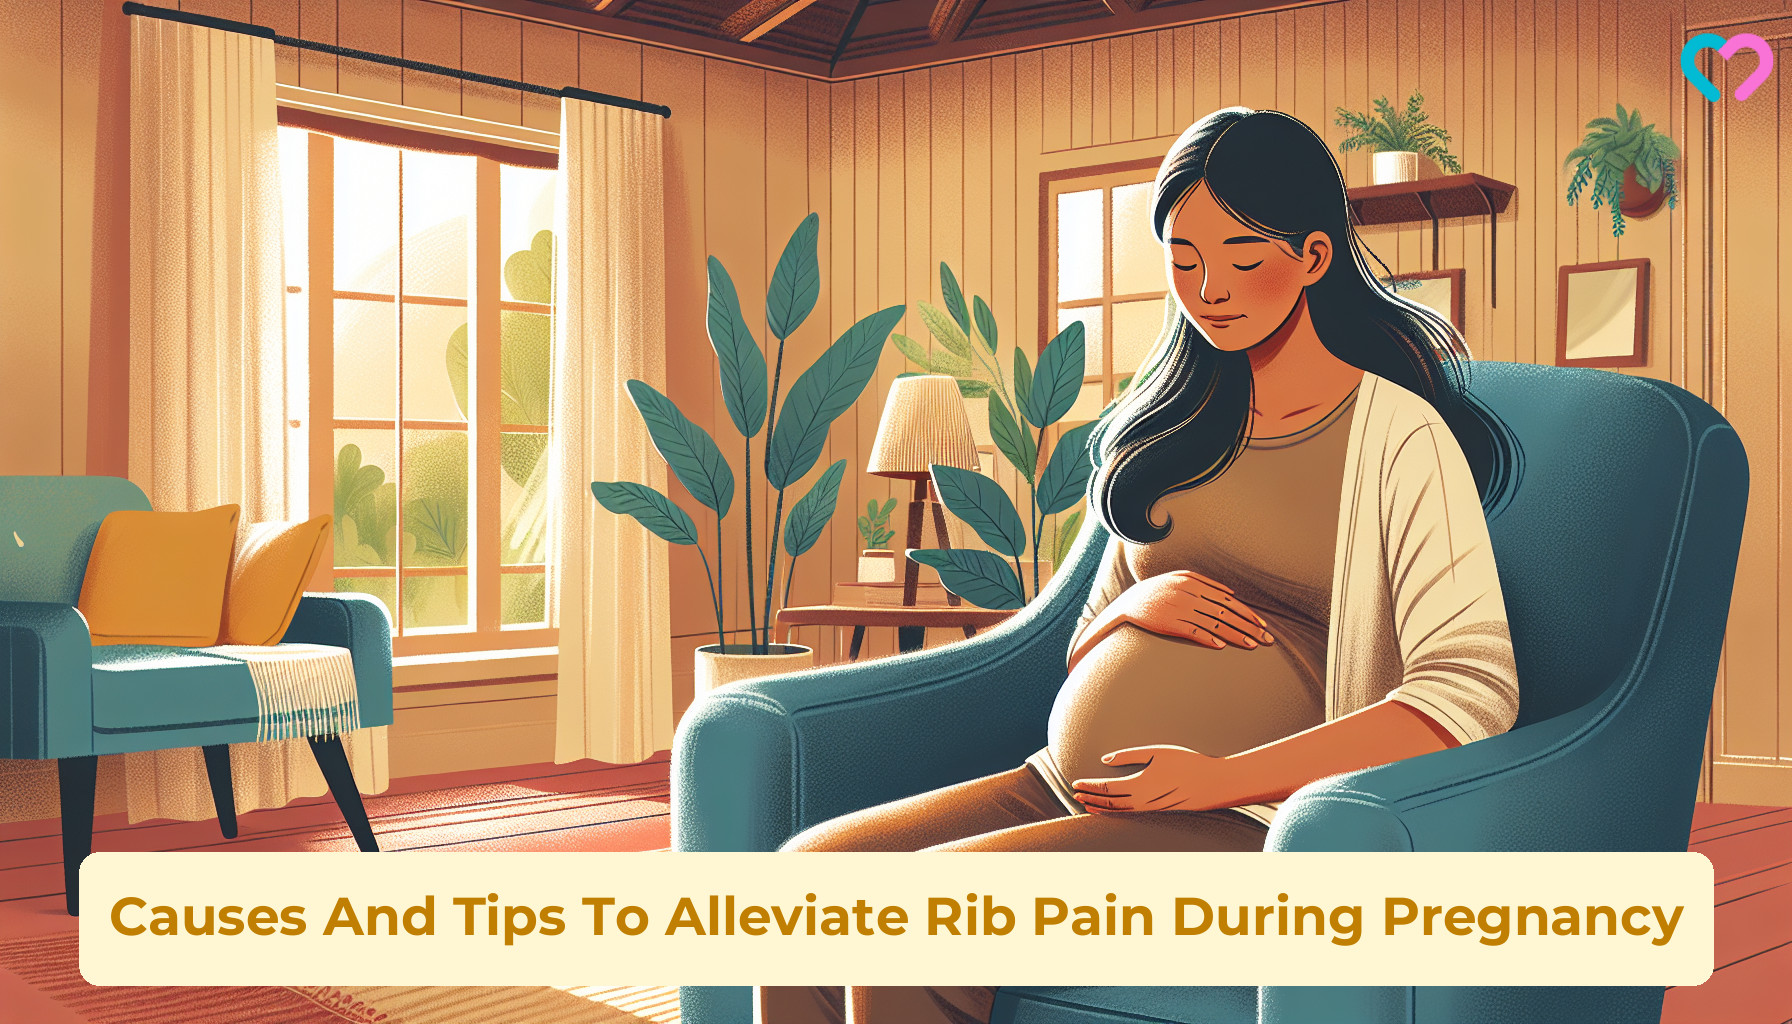 Rib pain during pregnancy: Causes and tips for relief